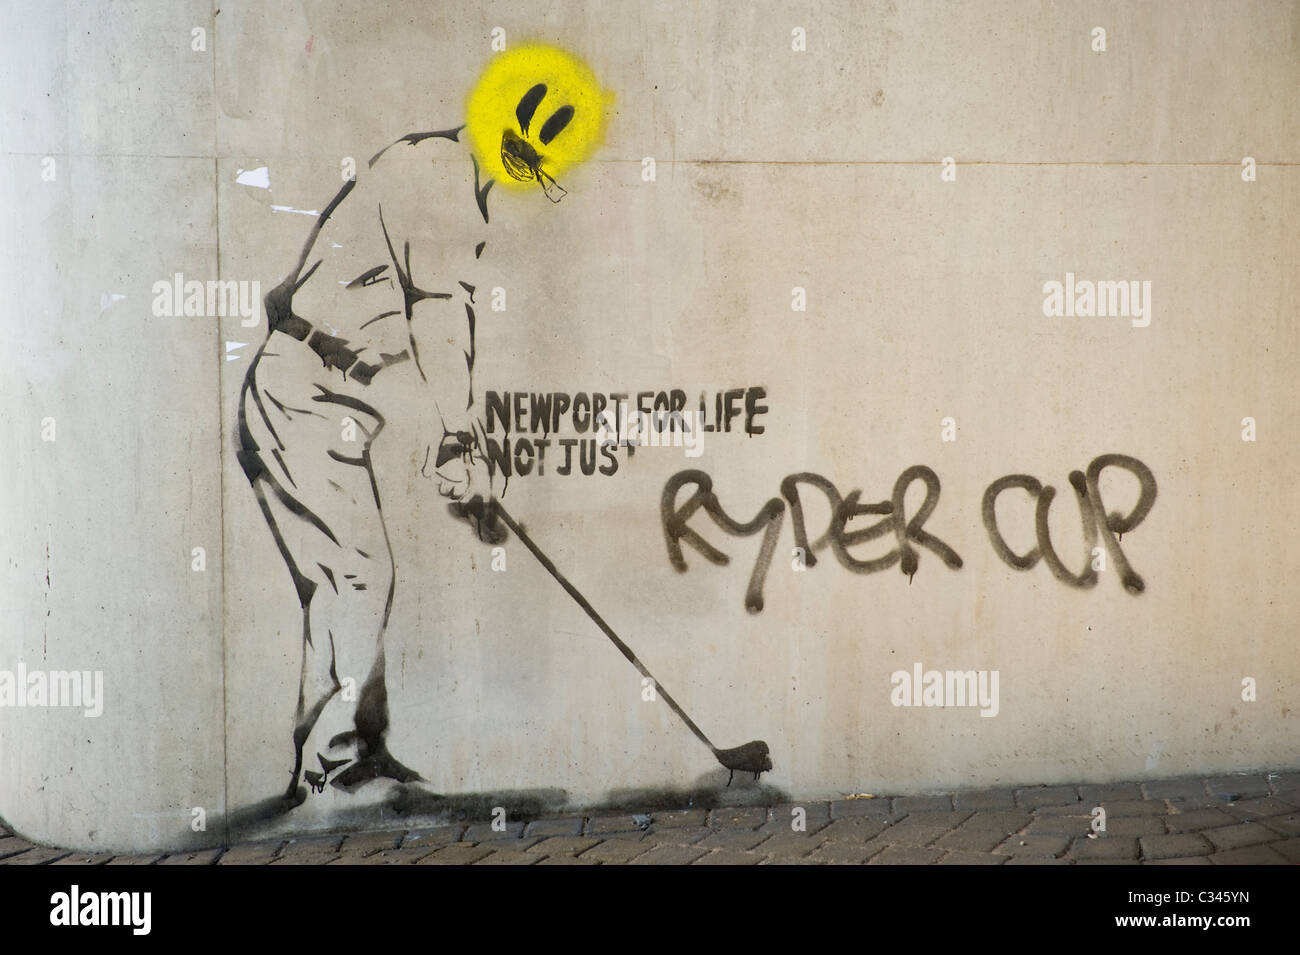 NEWPORT FOR LIFE NOT JUST THE RYDER CUP roadside graffiti under flyover in Newport South Wales UK Stock Photo